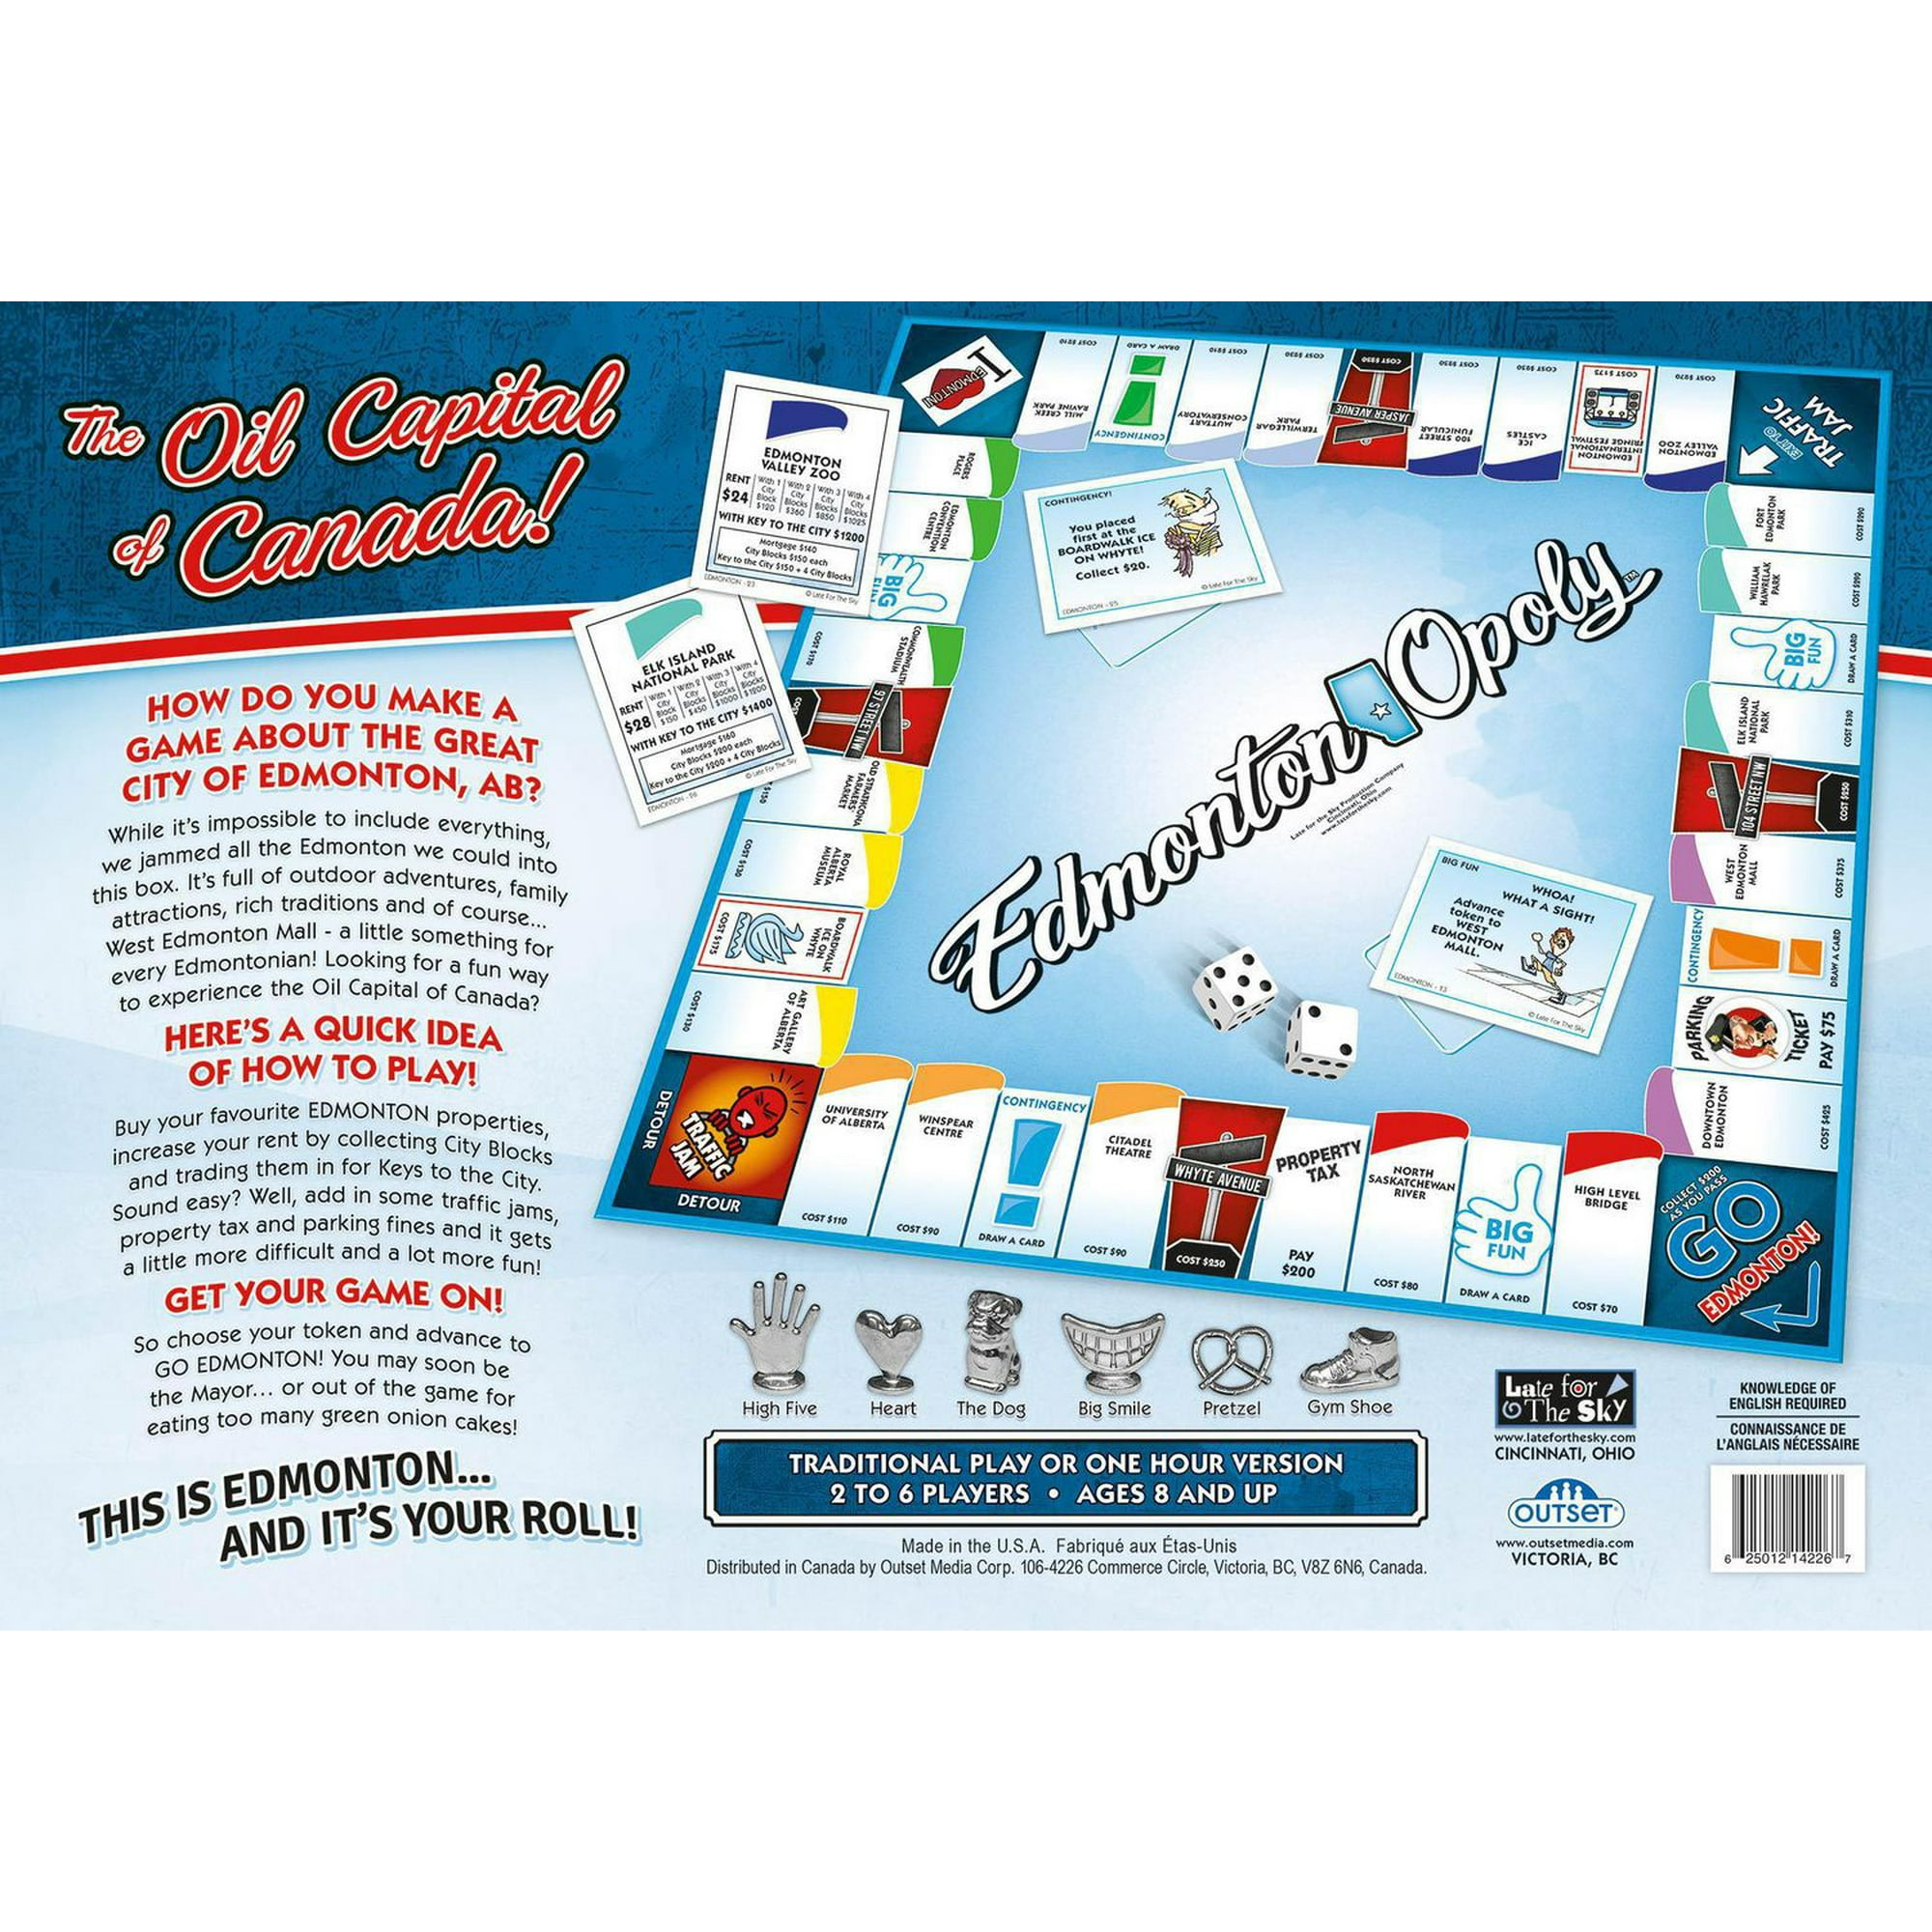 Ely-Opoly Board Game